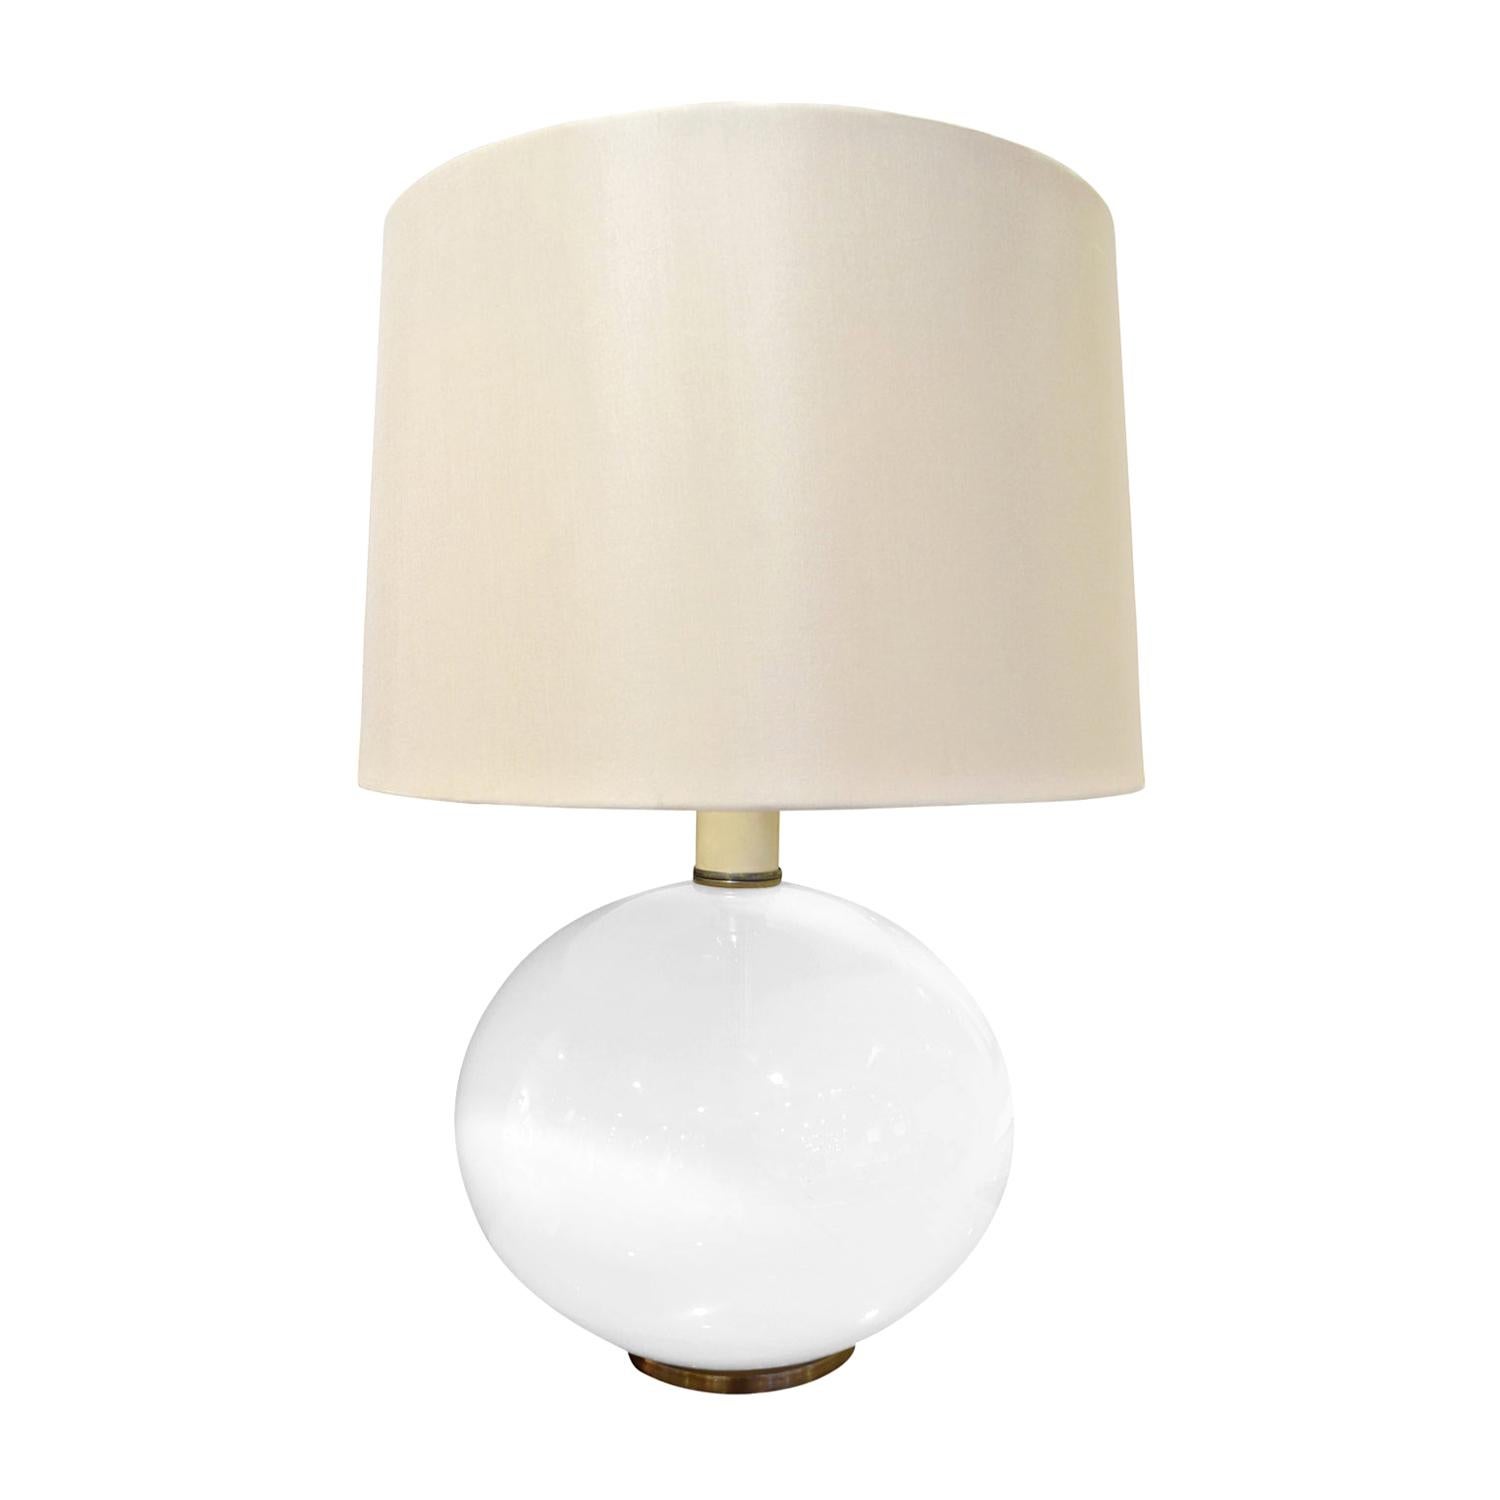 Elegant Table Lamp in White Glass with Brass Base, 1960s For Sale